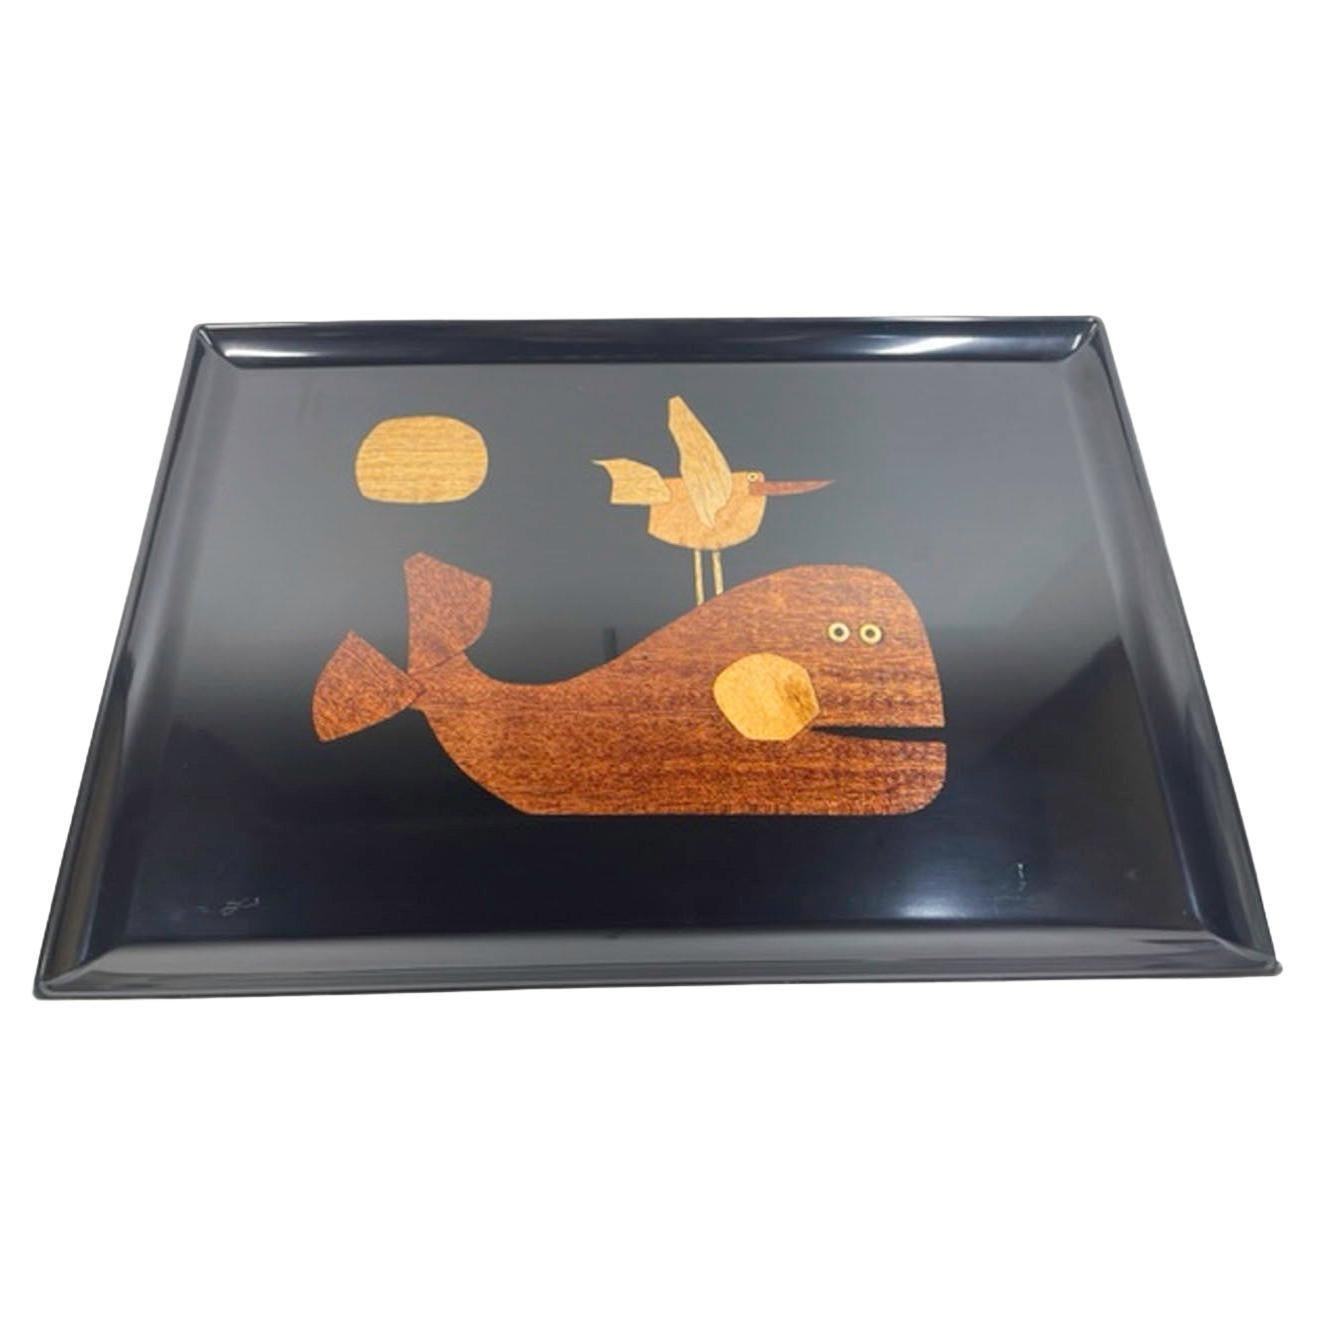 Vintage Couroc Phenolic Resin Serving Tray W/ Wood Inlaid Whale and Bird